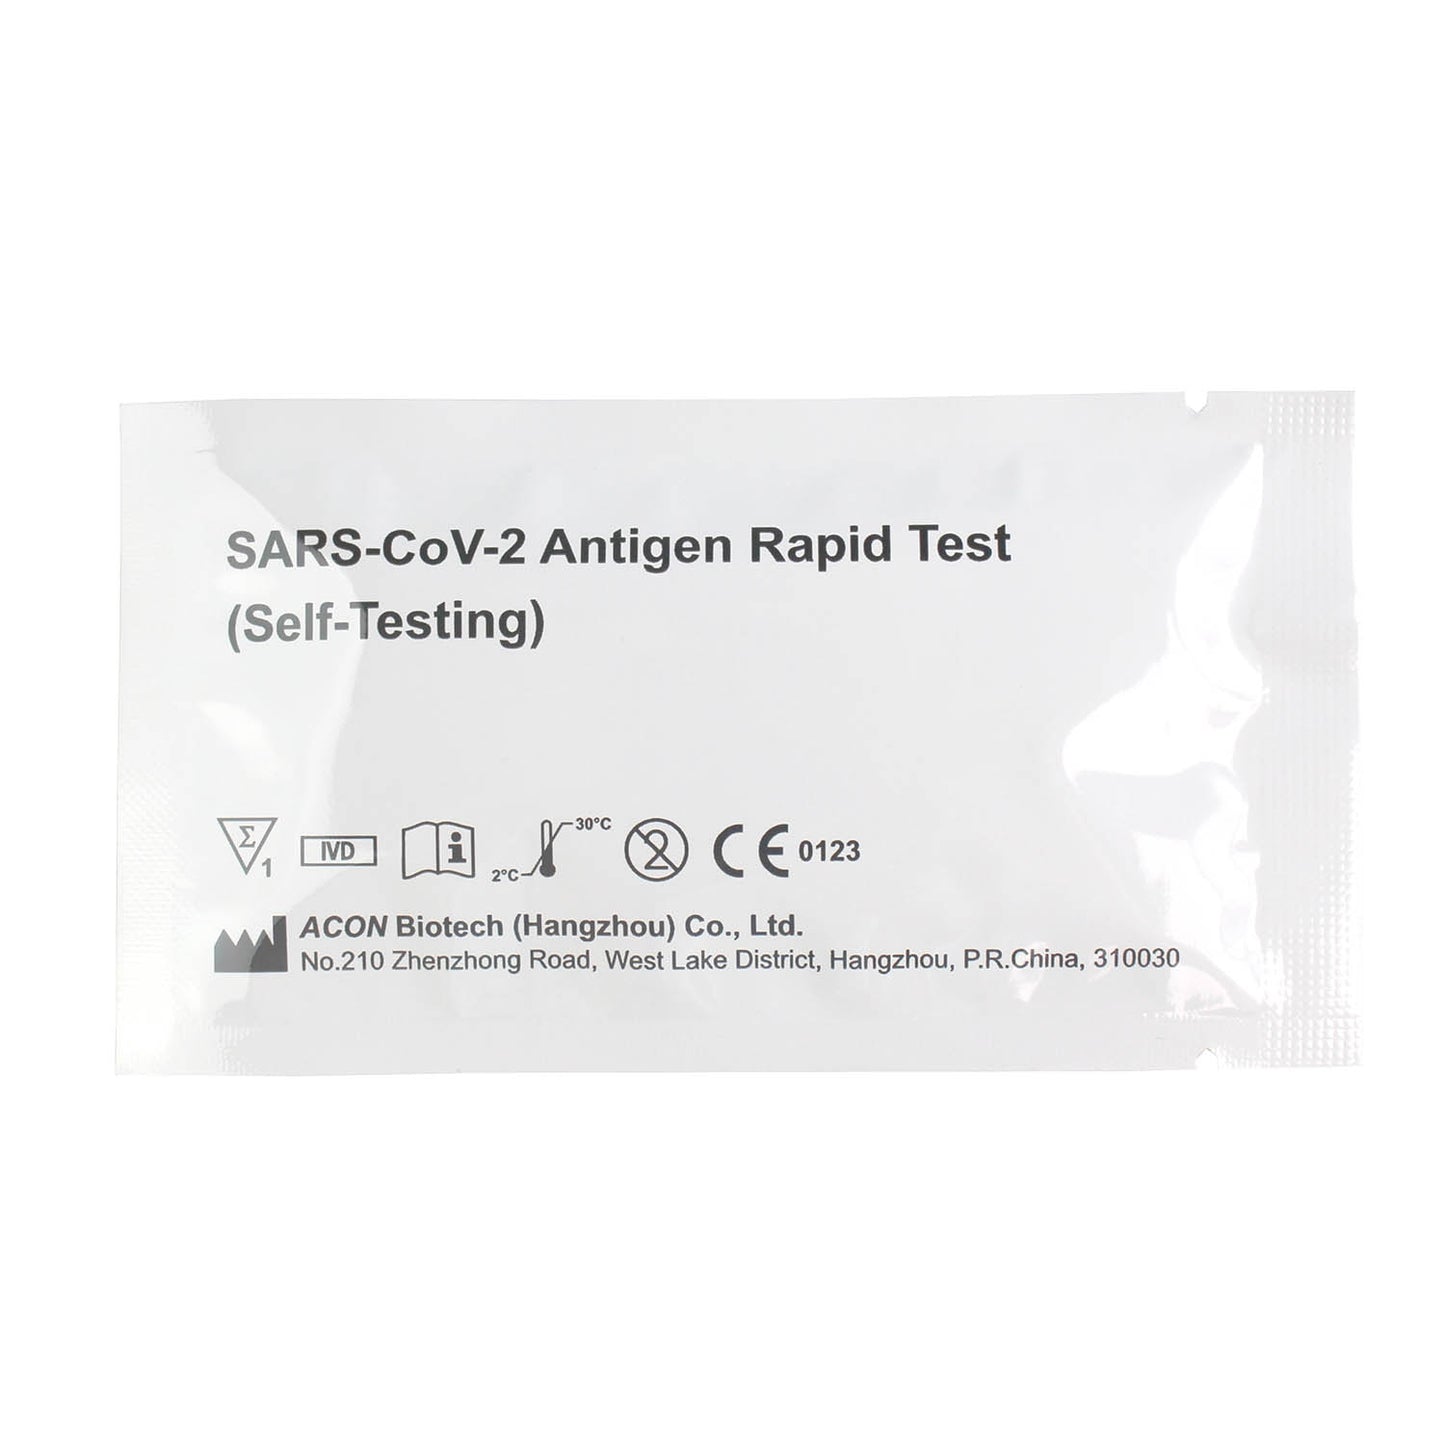 Hughes Healthcare COVID-19 Rapid Antigen Lateral Flow Test Kit x 1